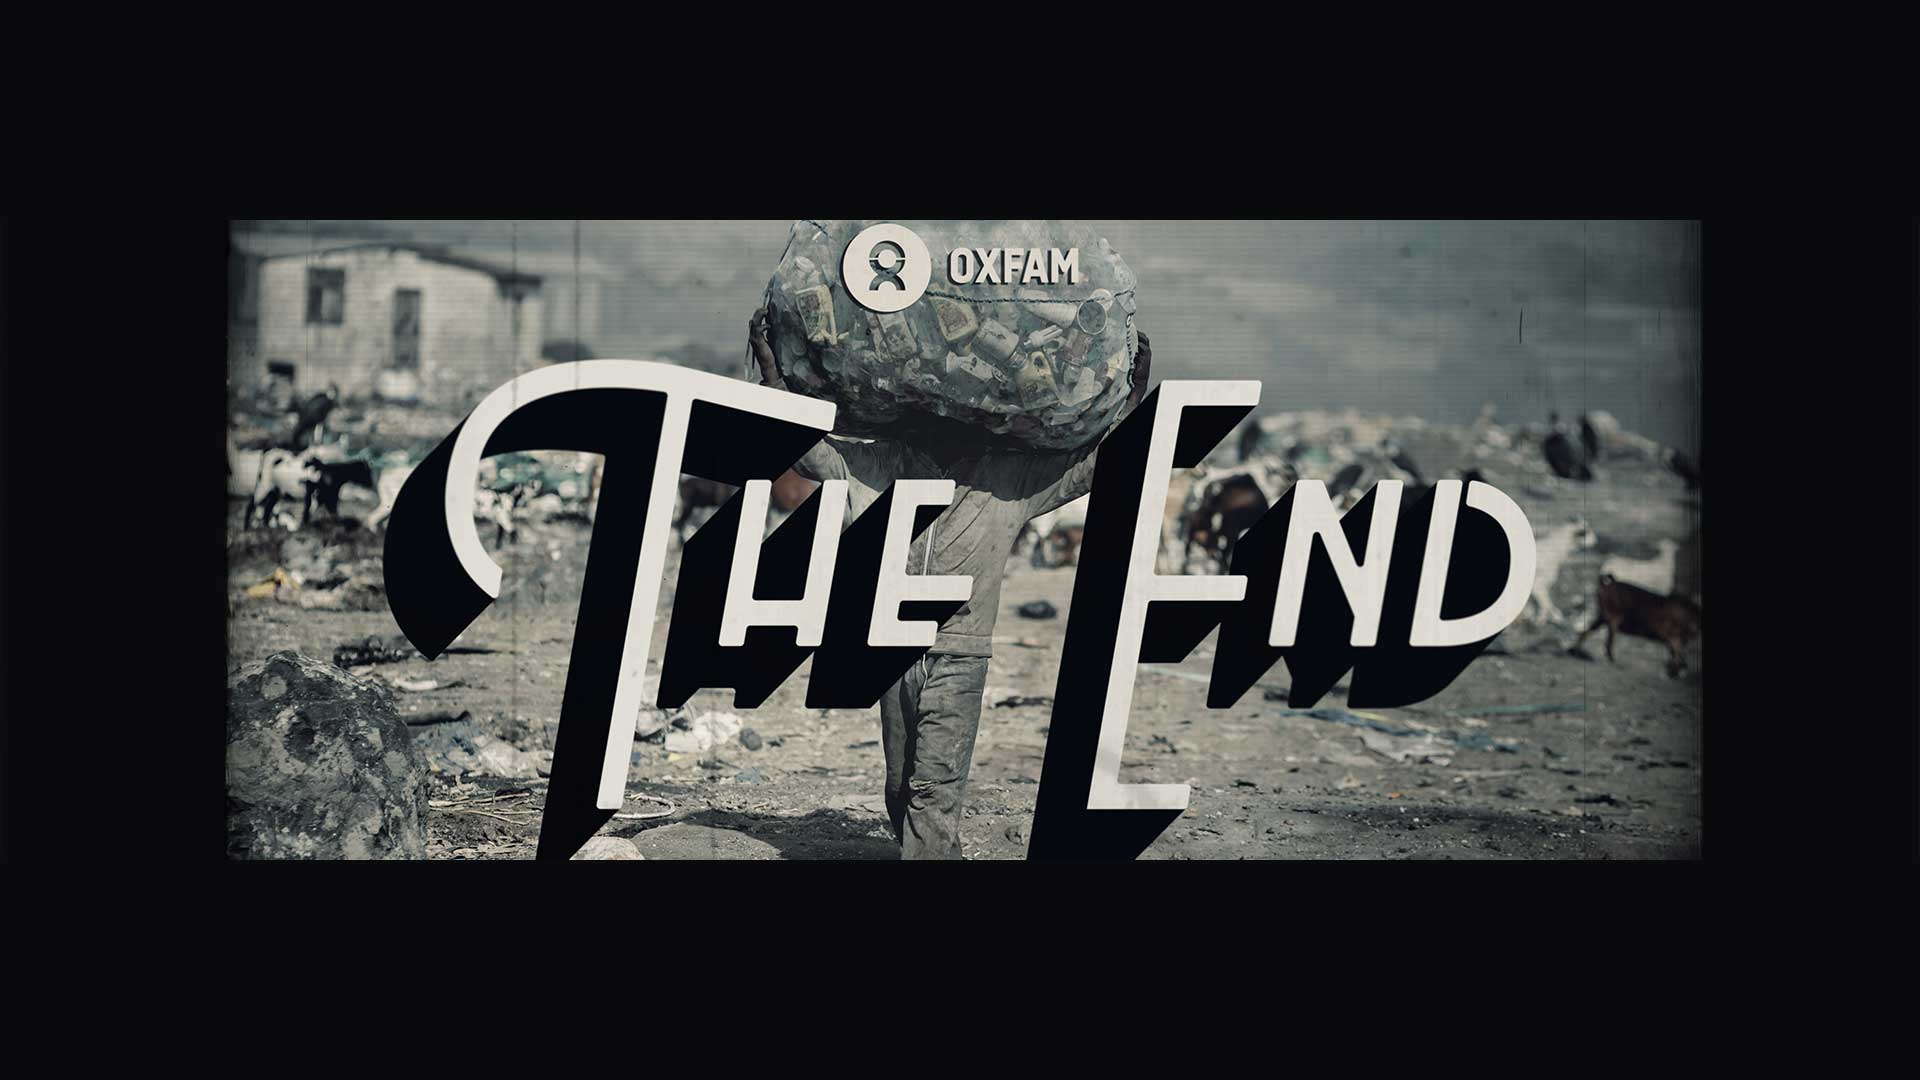 Video footage with text saying The end